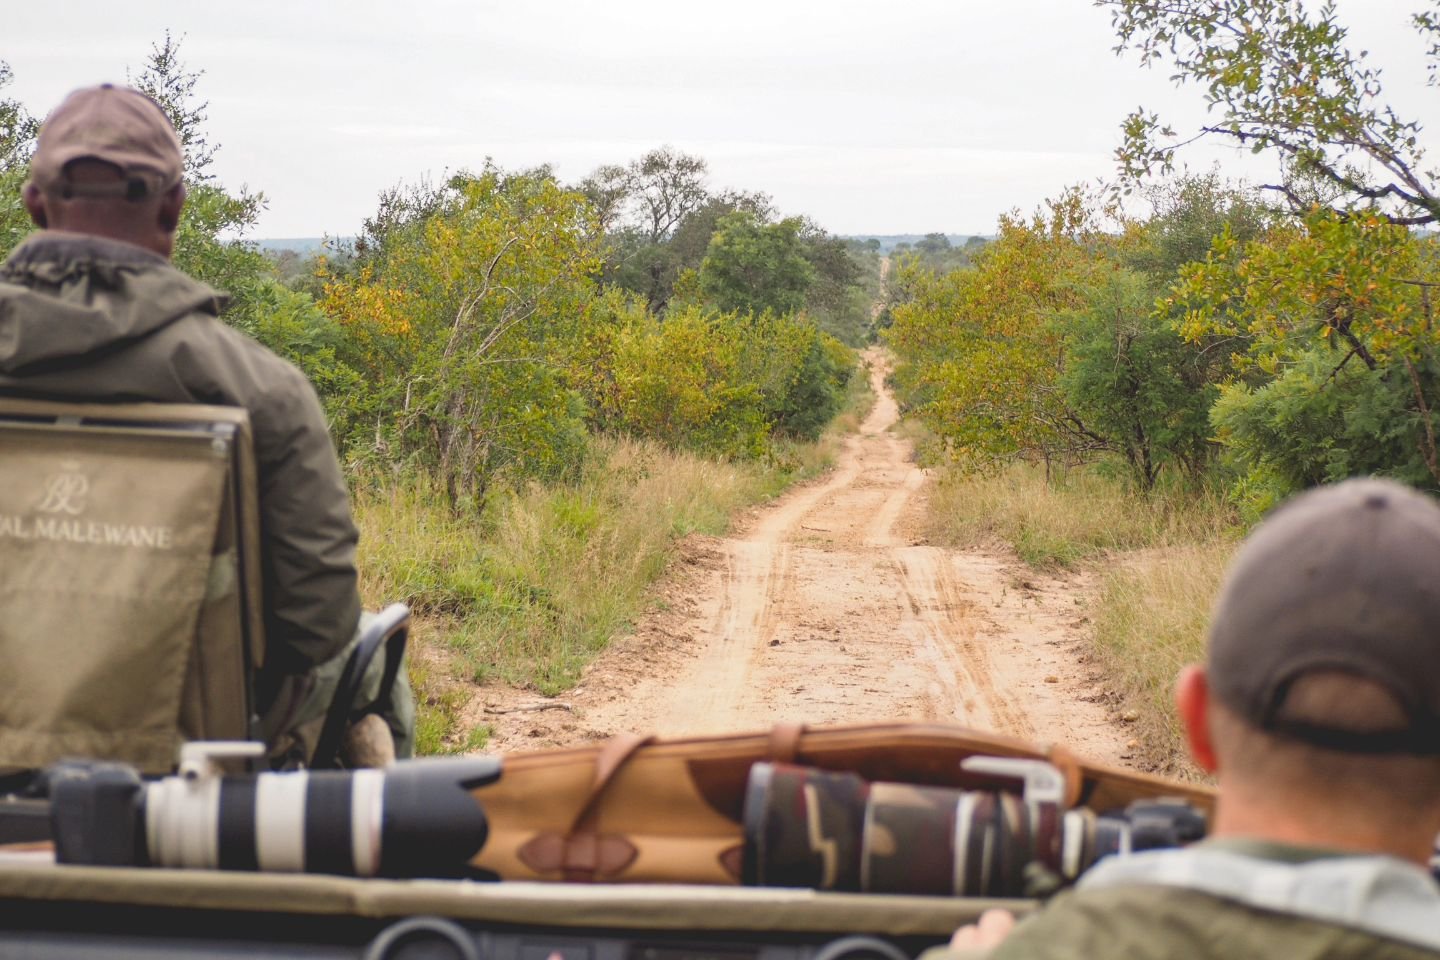 we went on a safari! a plan that hatched with @flying.jon during zoom hangouts of spring 2020 when we couldn't go on our usual trips finally happened four years later and it was so much better than i could have possibly imagined.

before i get to any